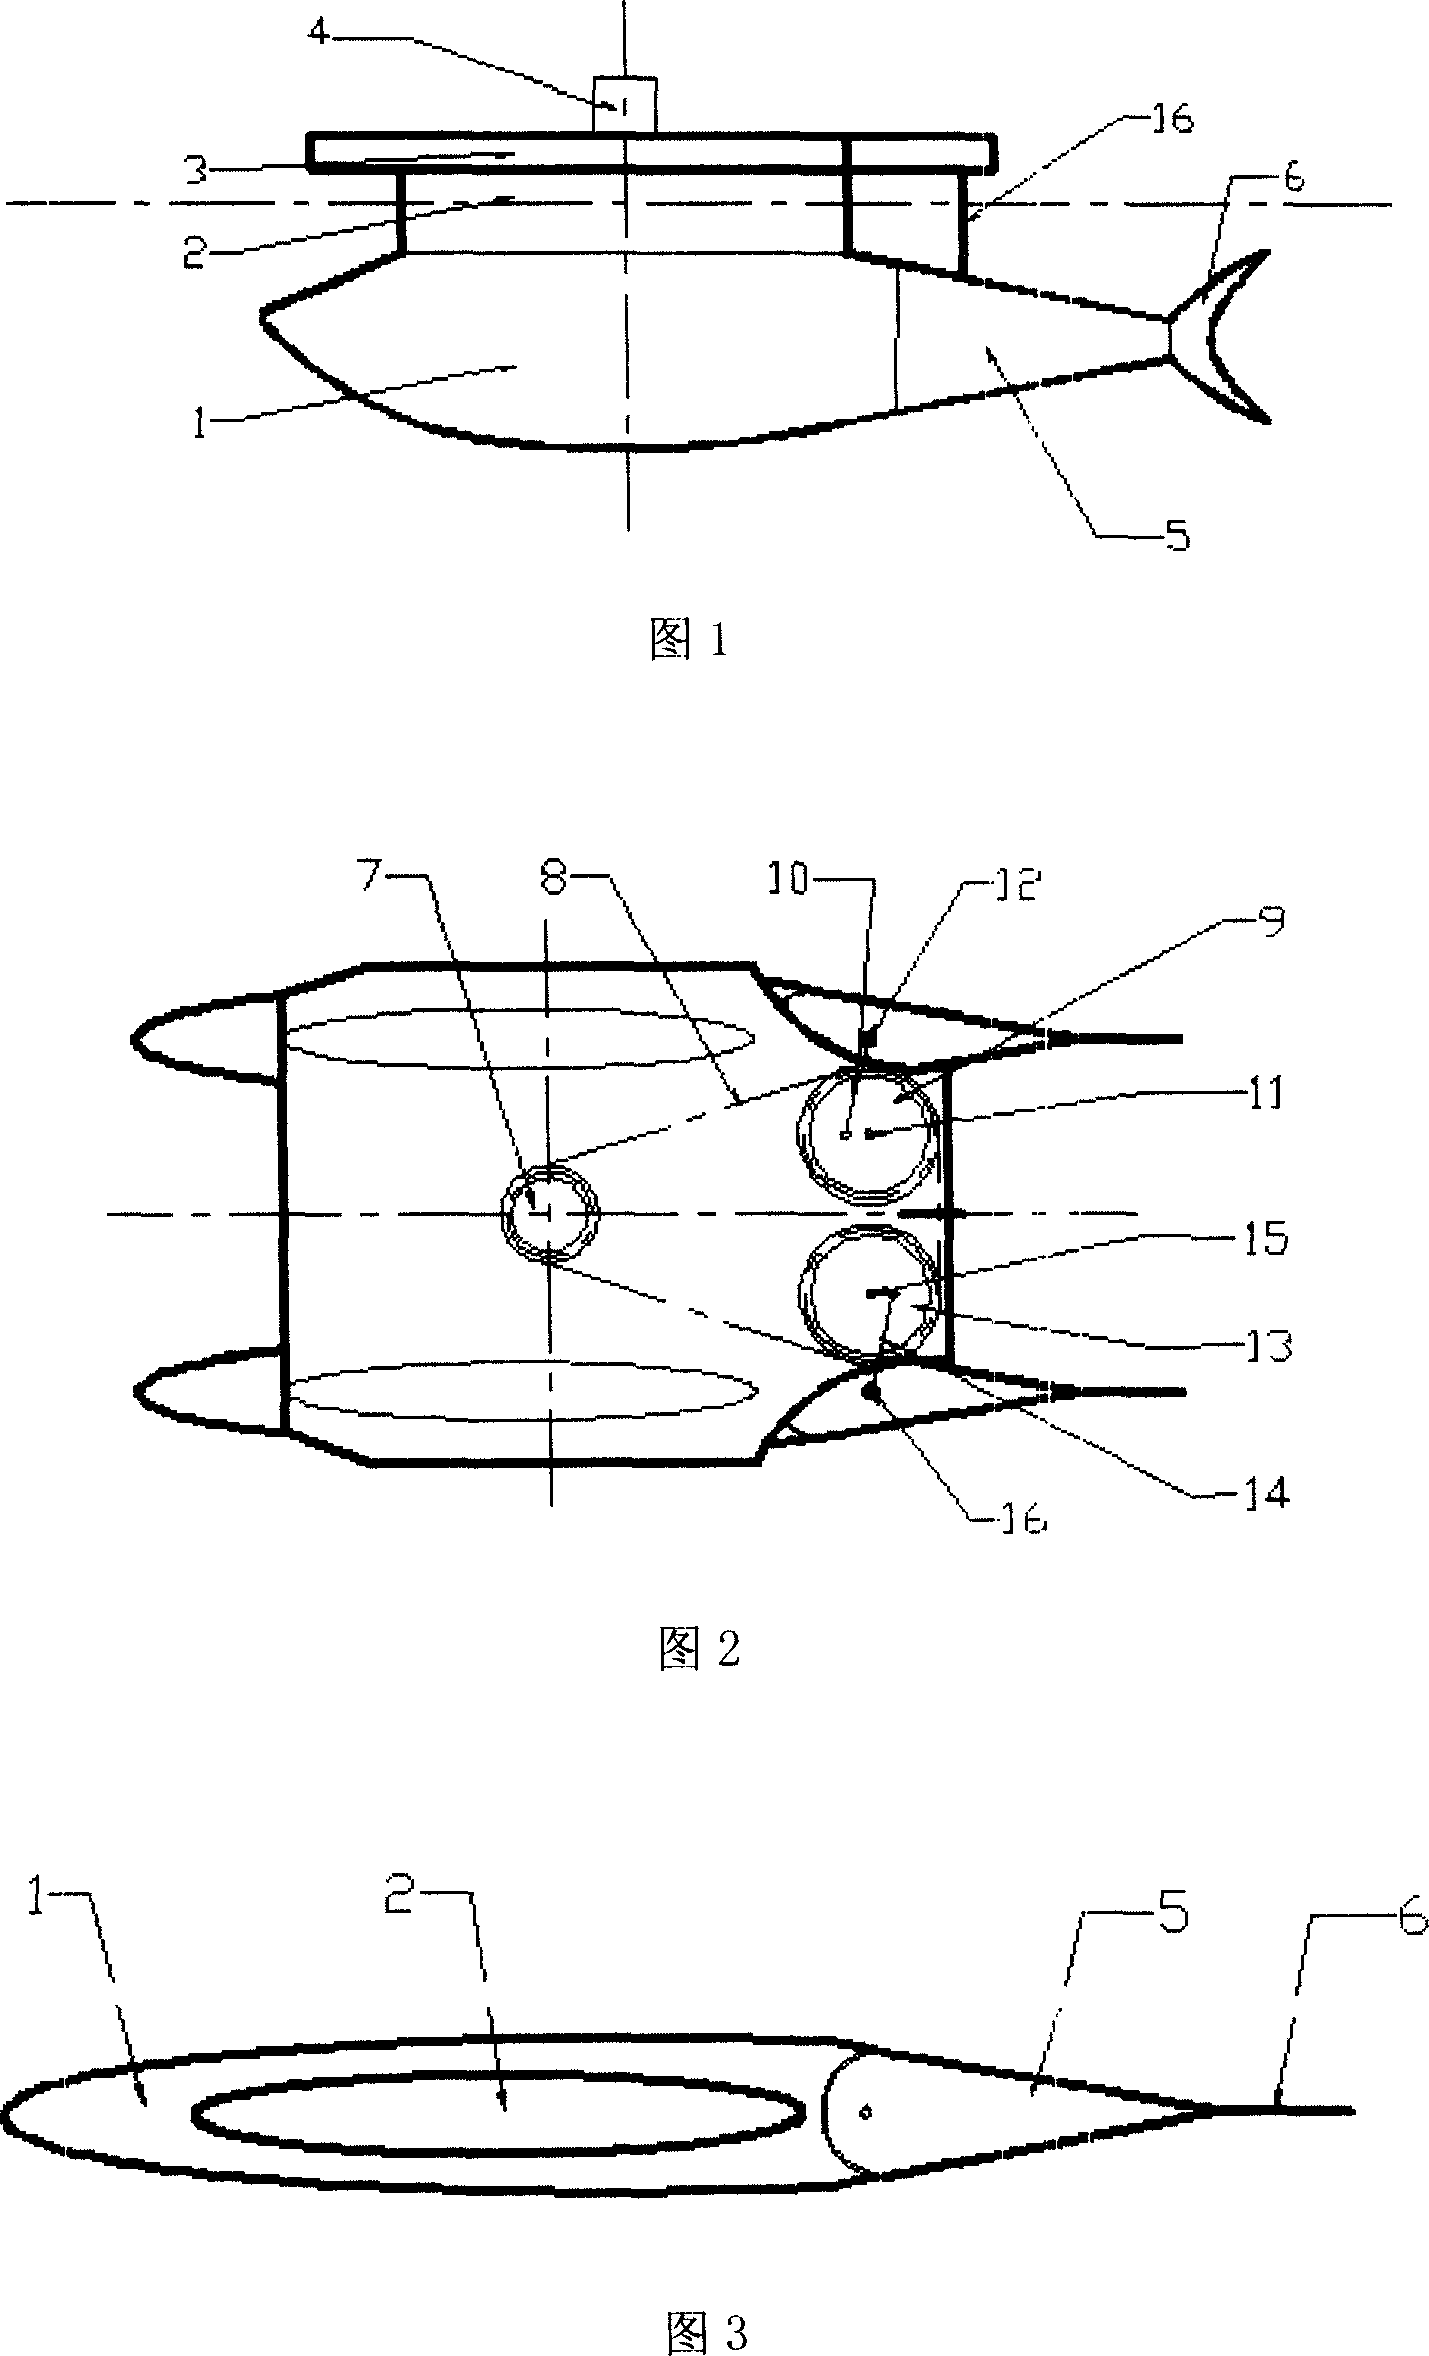 Bionic double tail sterm propeller